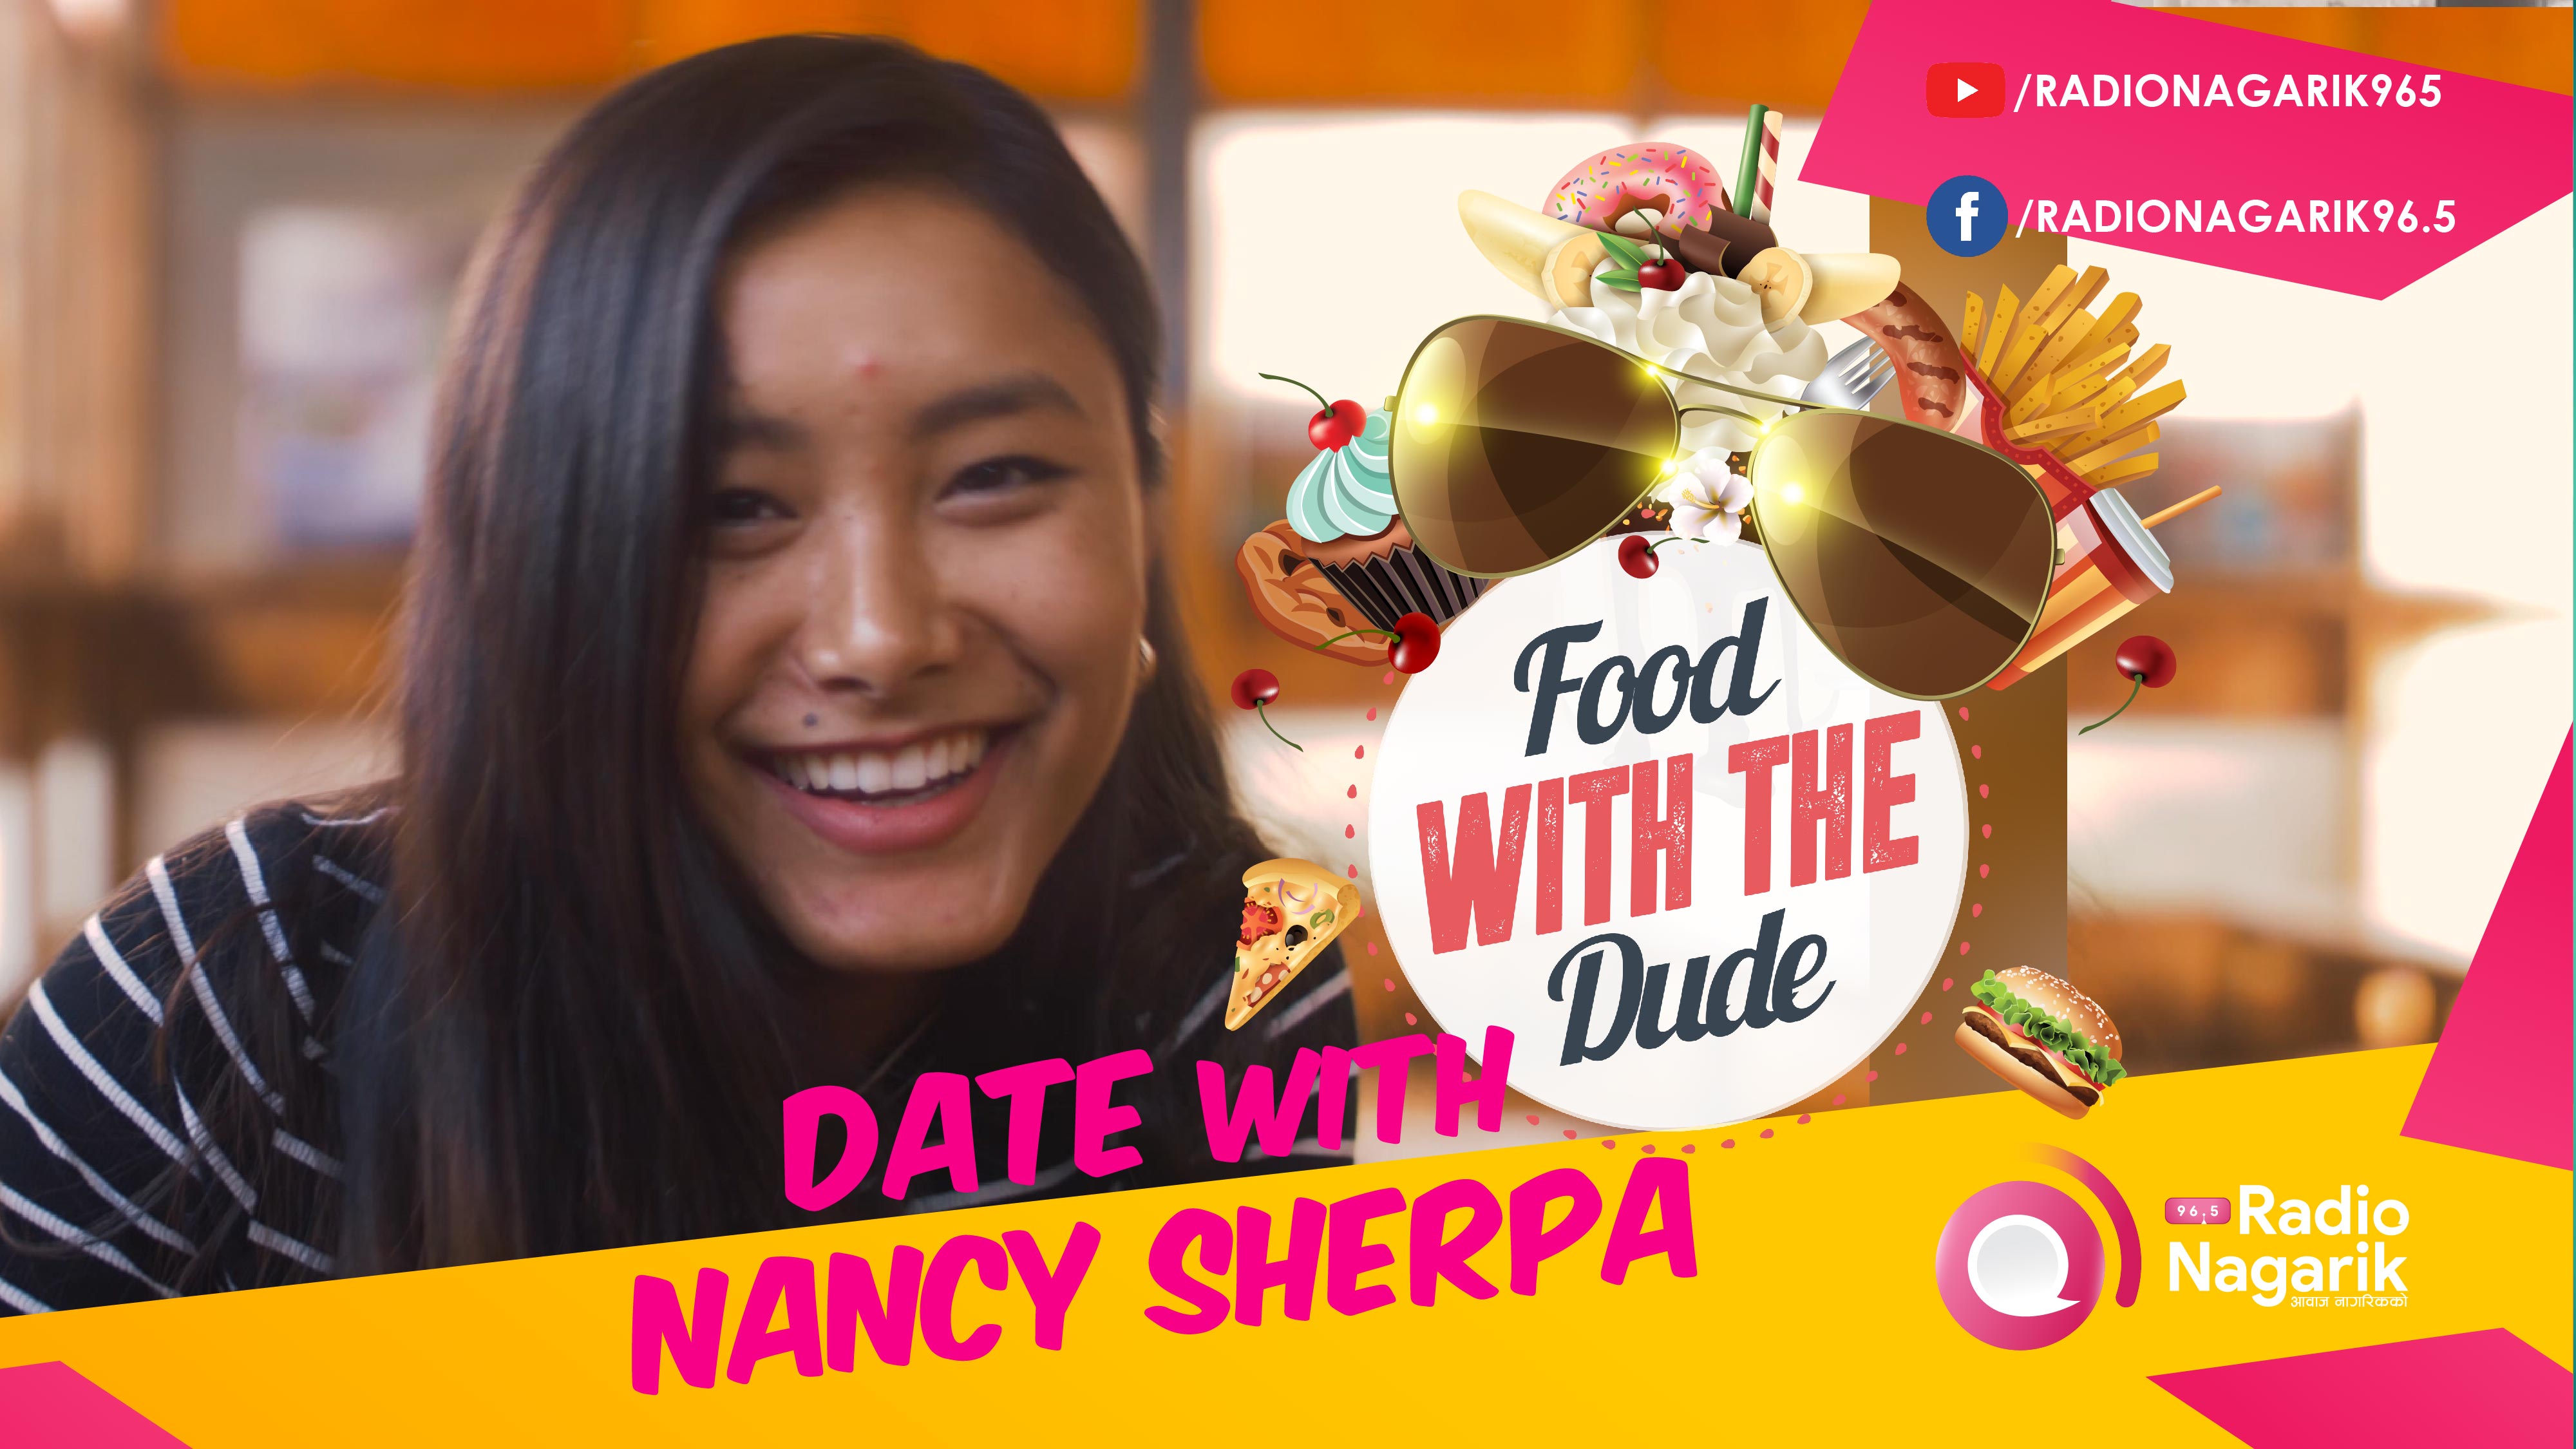 Date with #NancySherpa | Blogger - DATE 4 | Food With The Dude